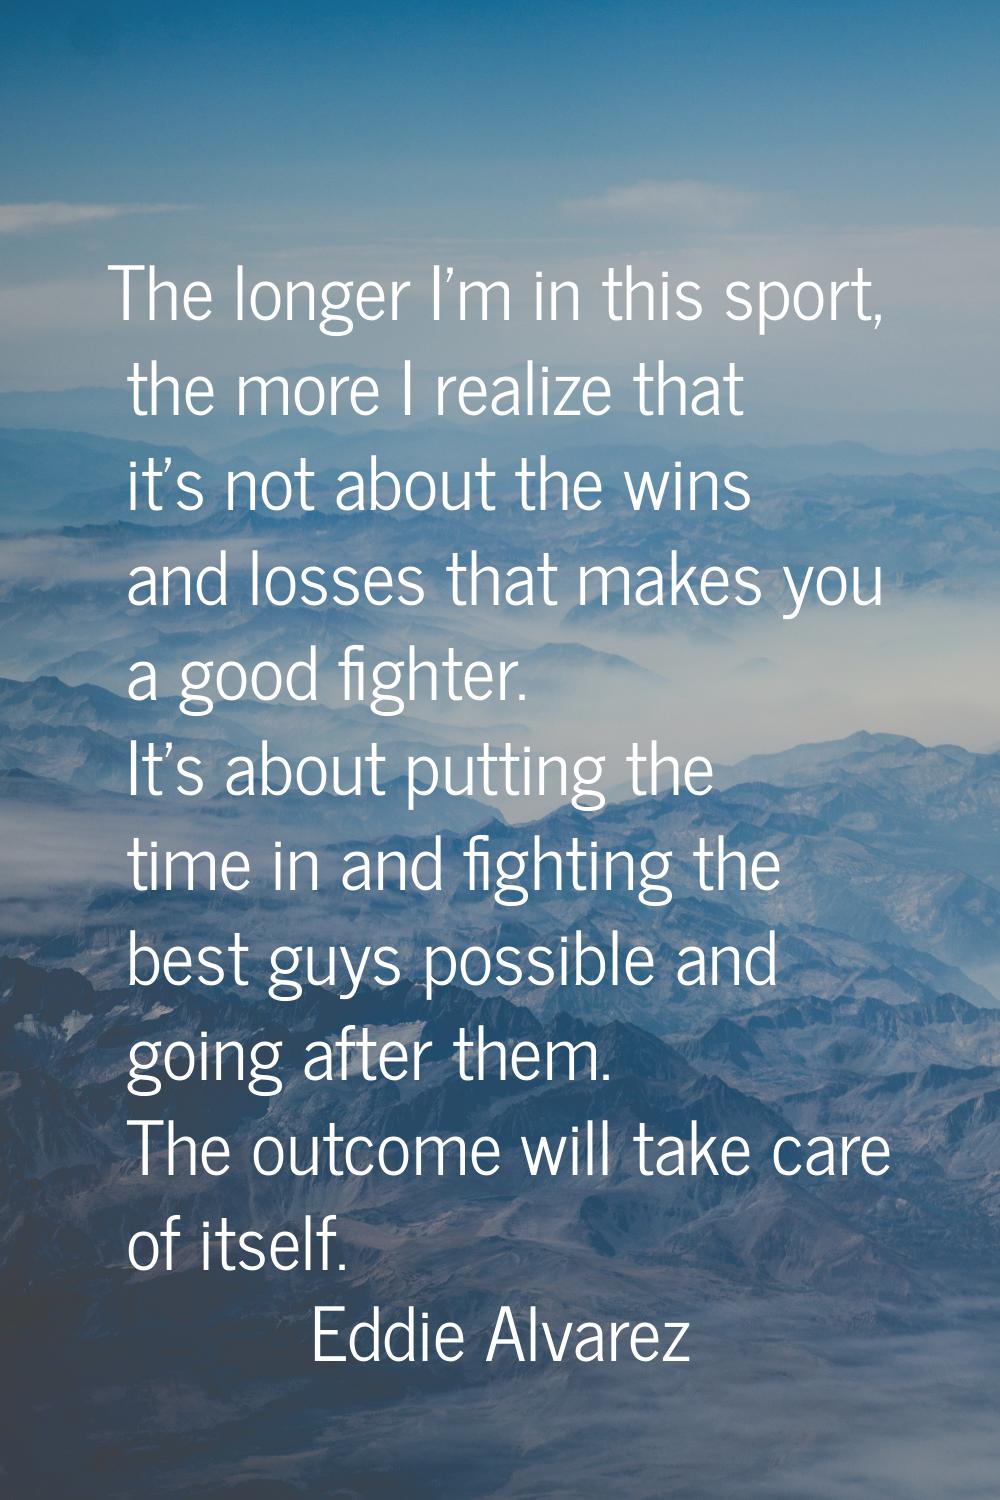 The longer I'm in this sport, the more I realize that it's not about the wins and losses that makes